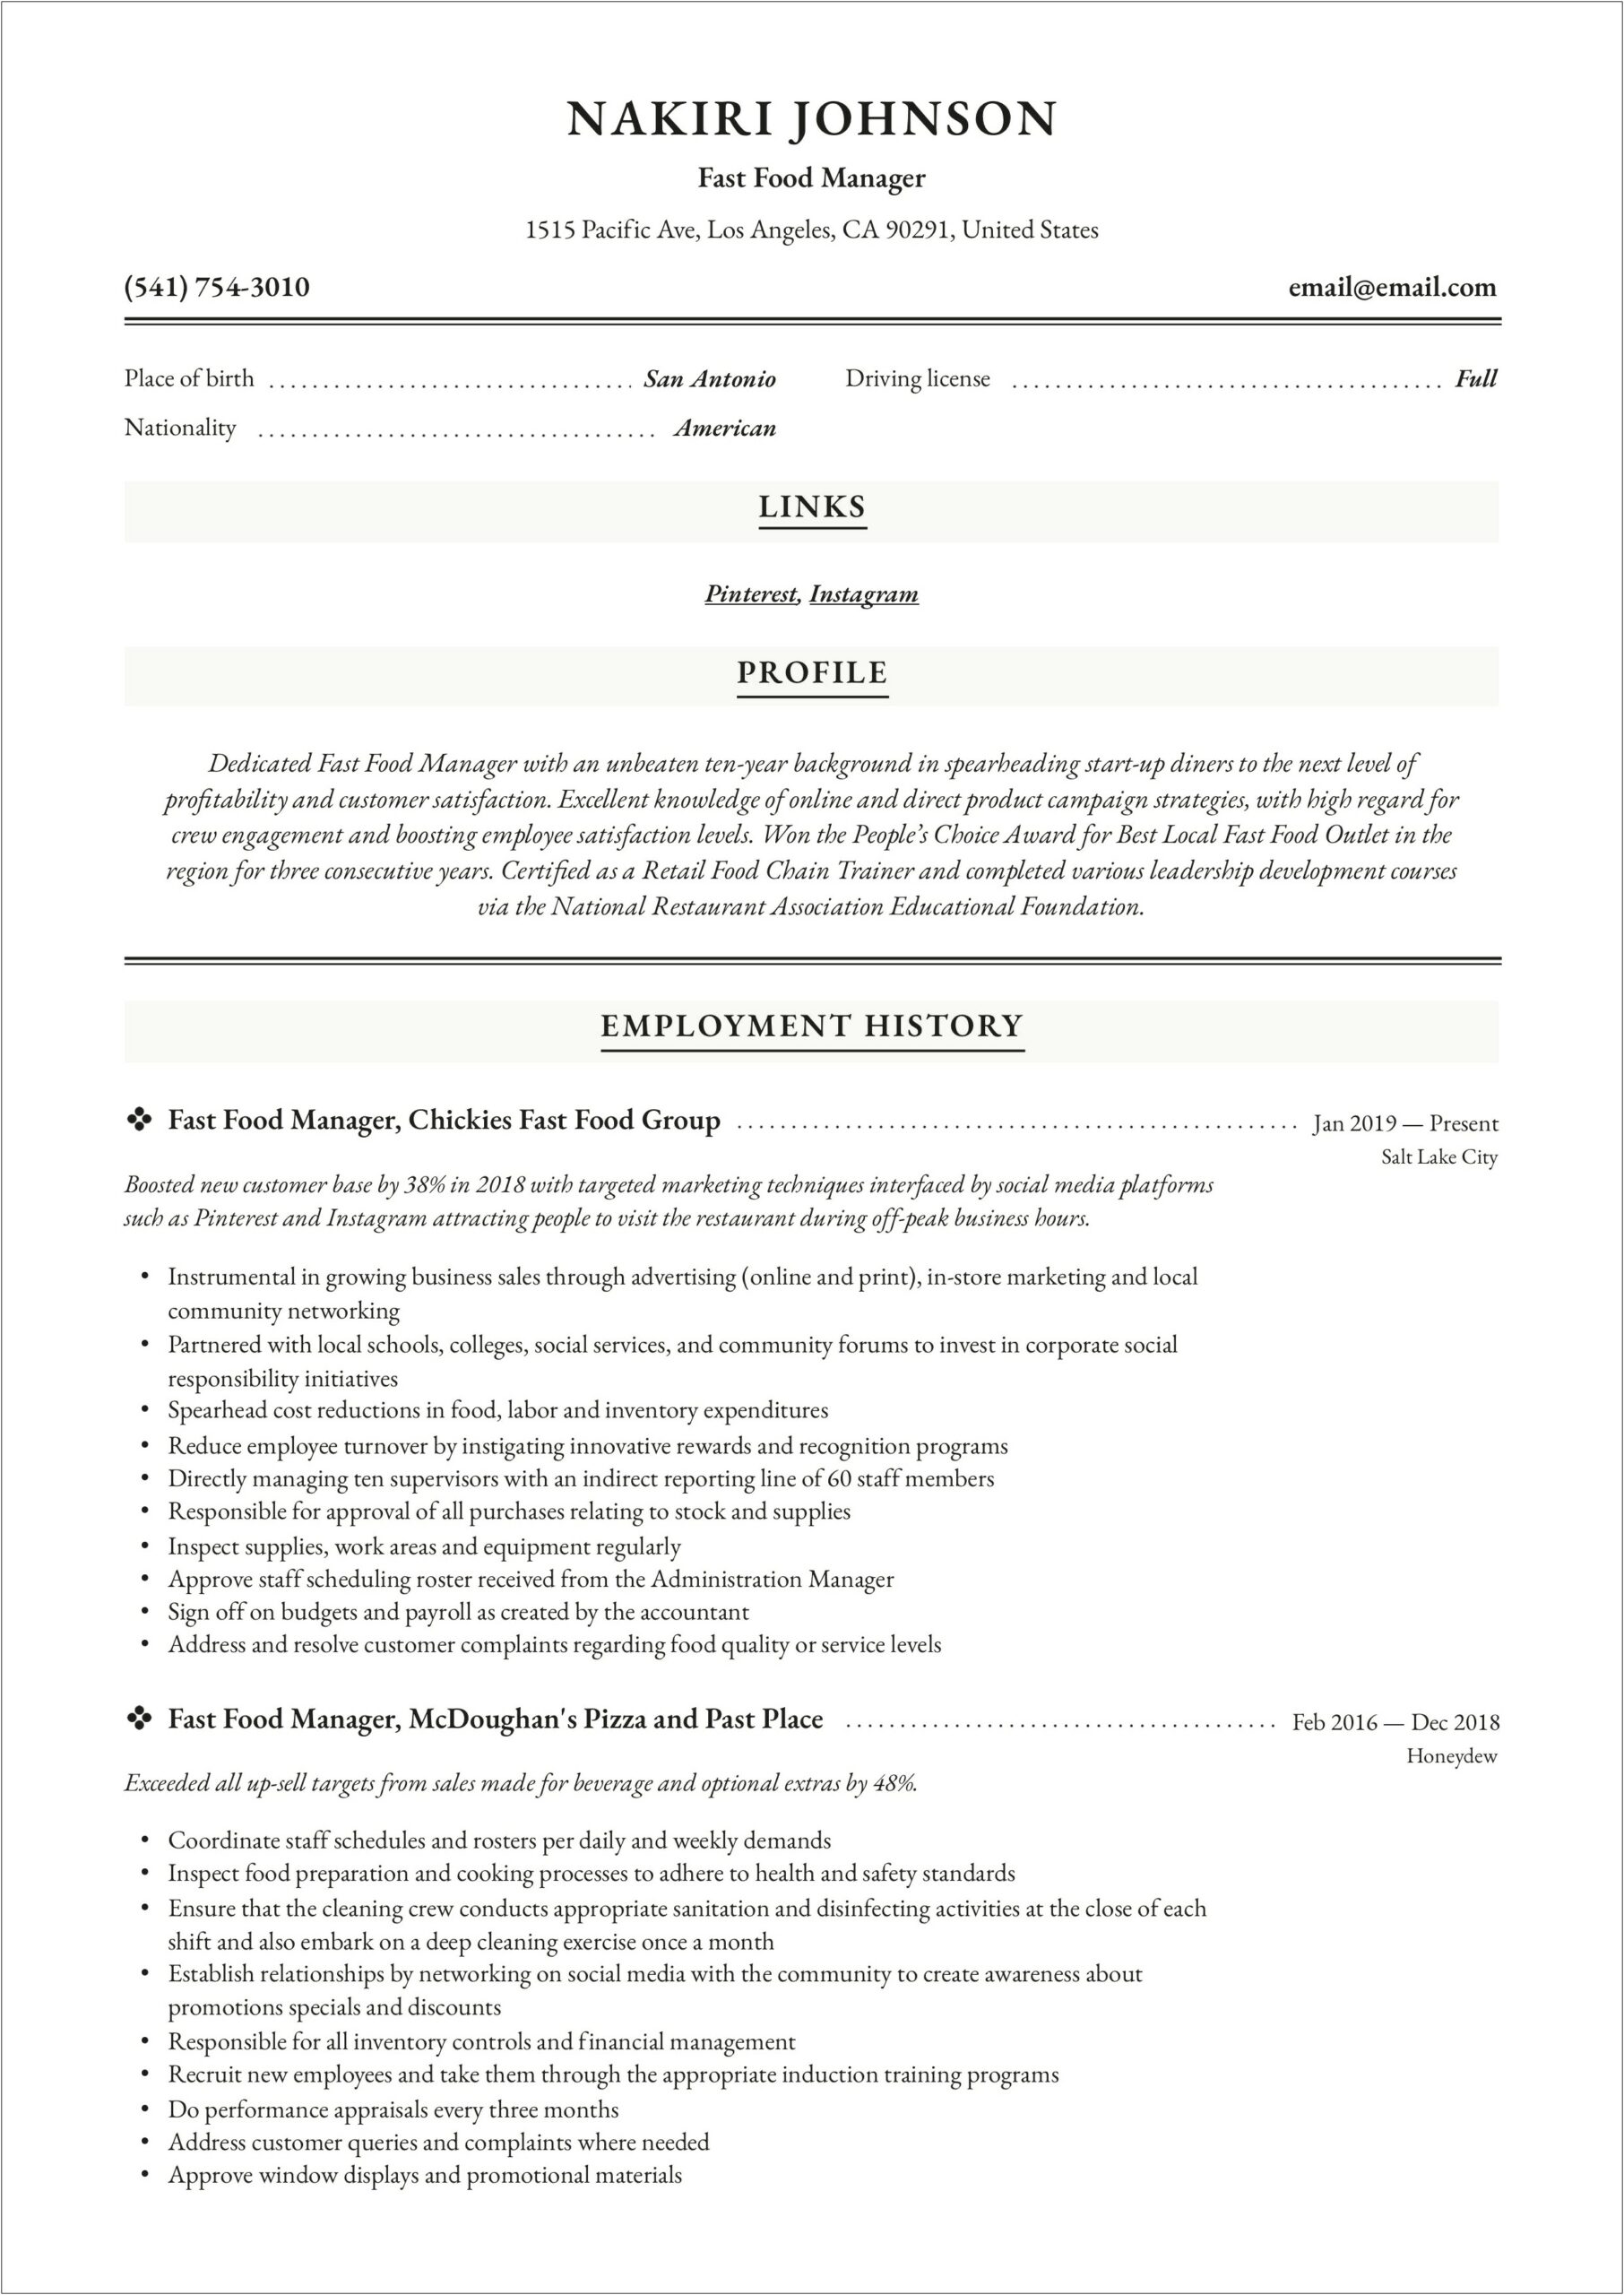 Resume Example With Only Fast Food Work